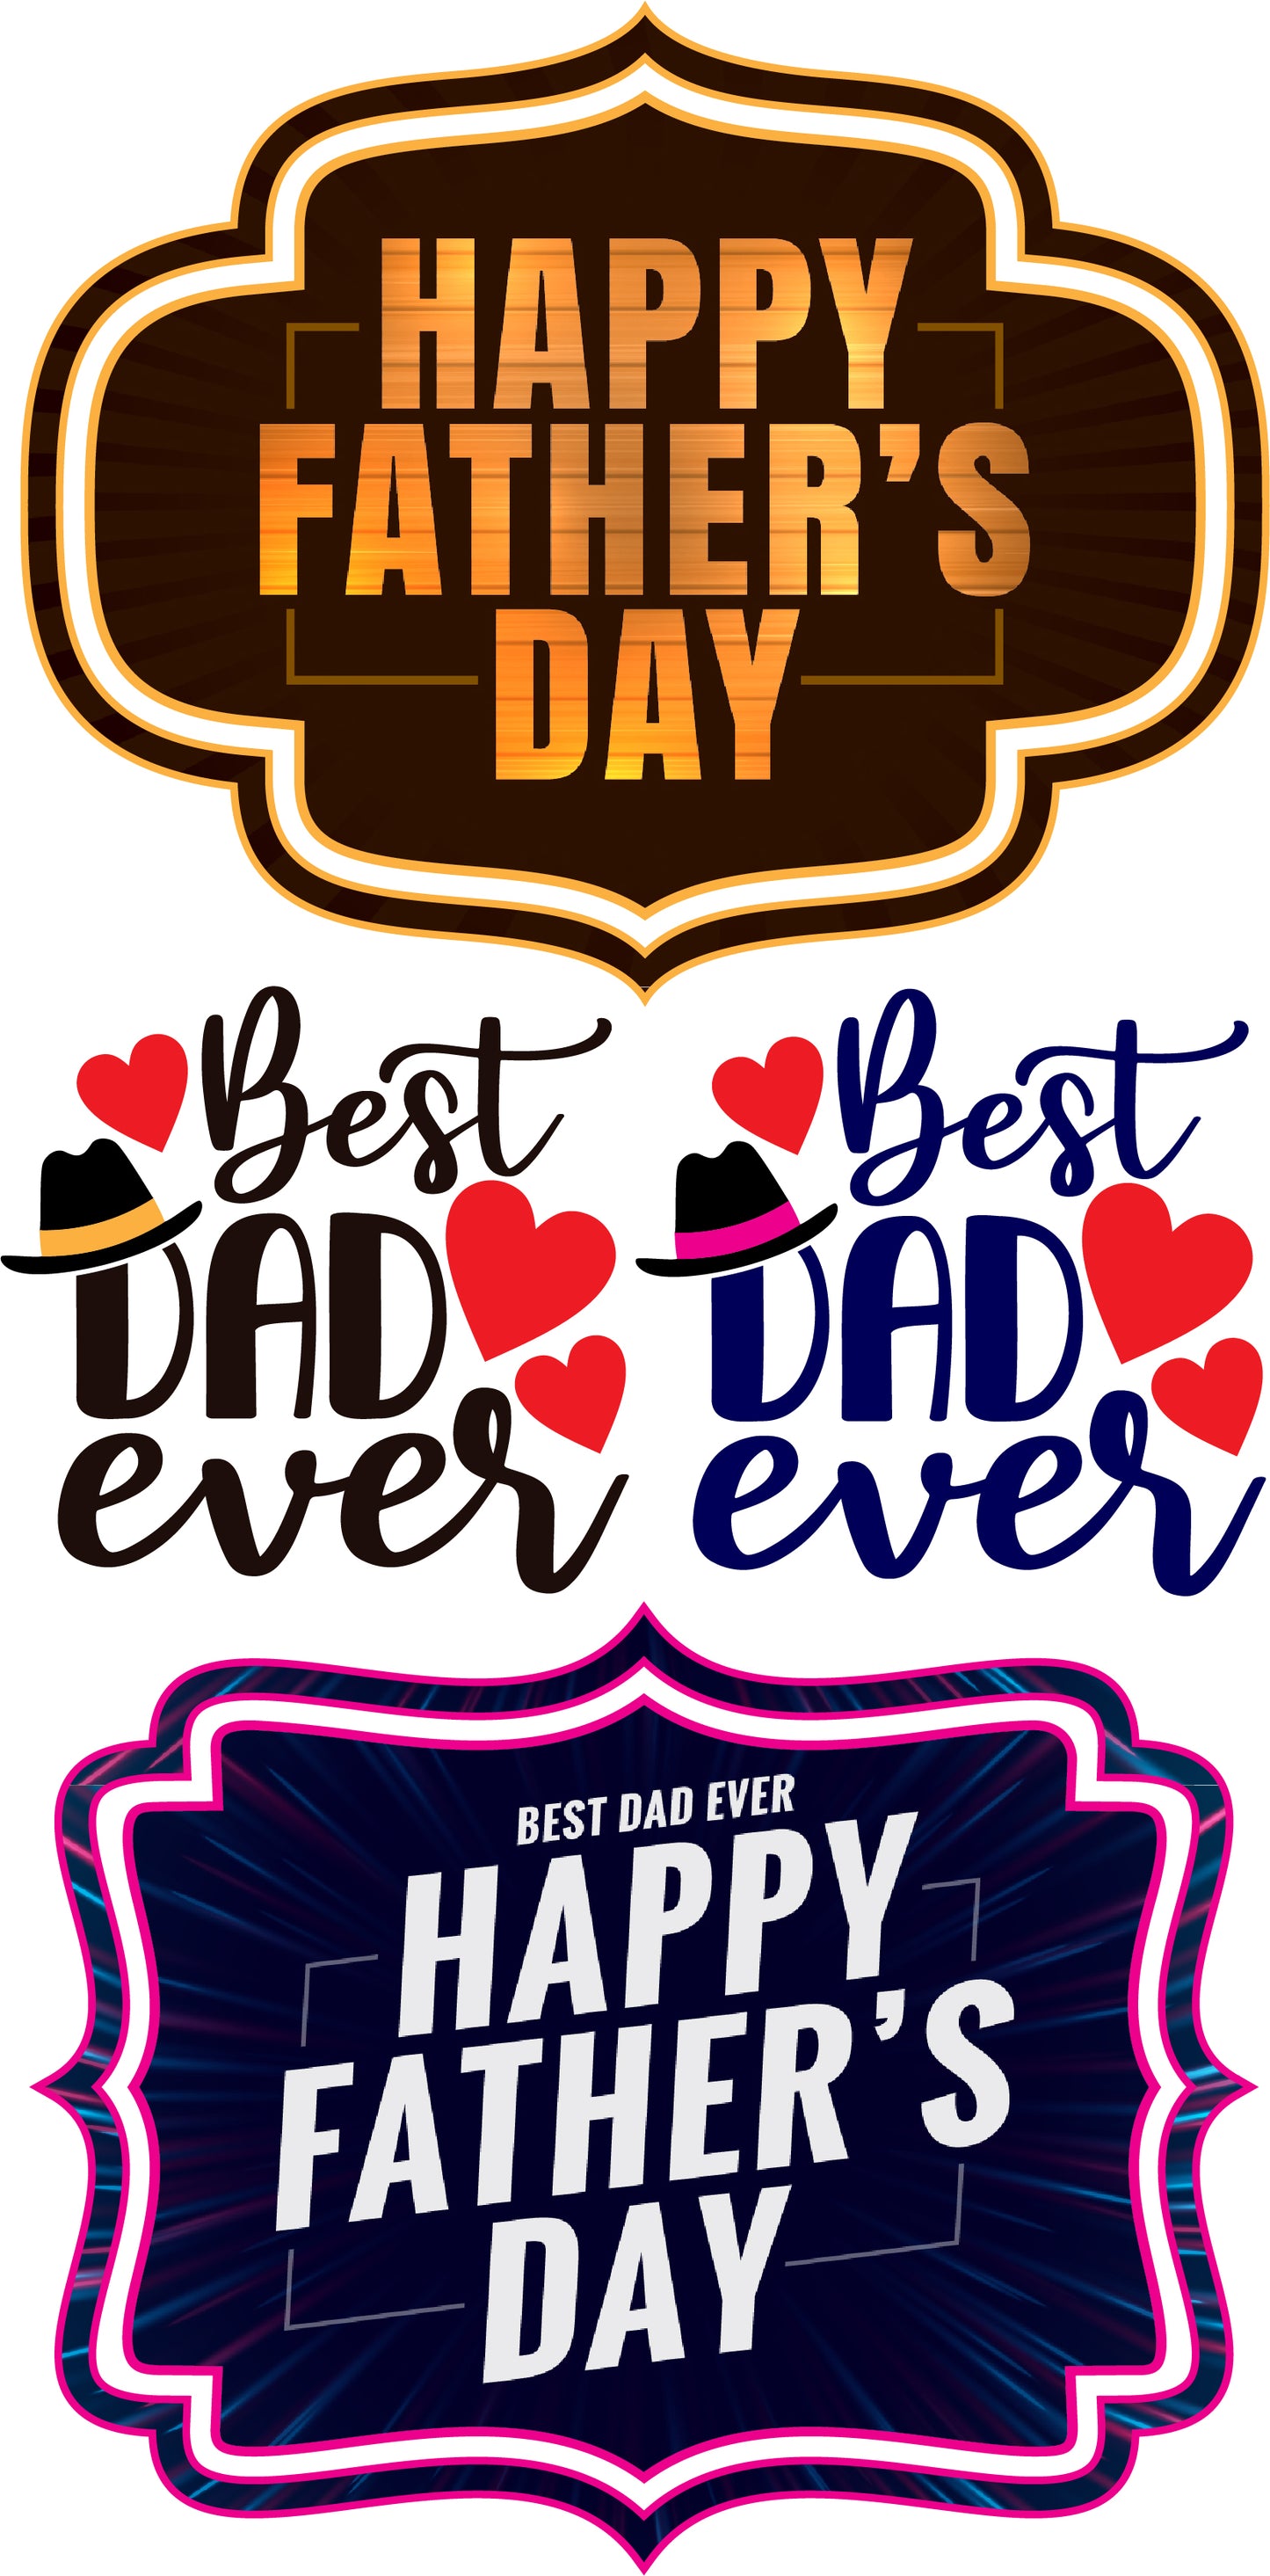 Happy Father's Day Signs - Set 1